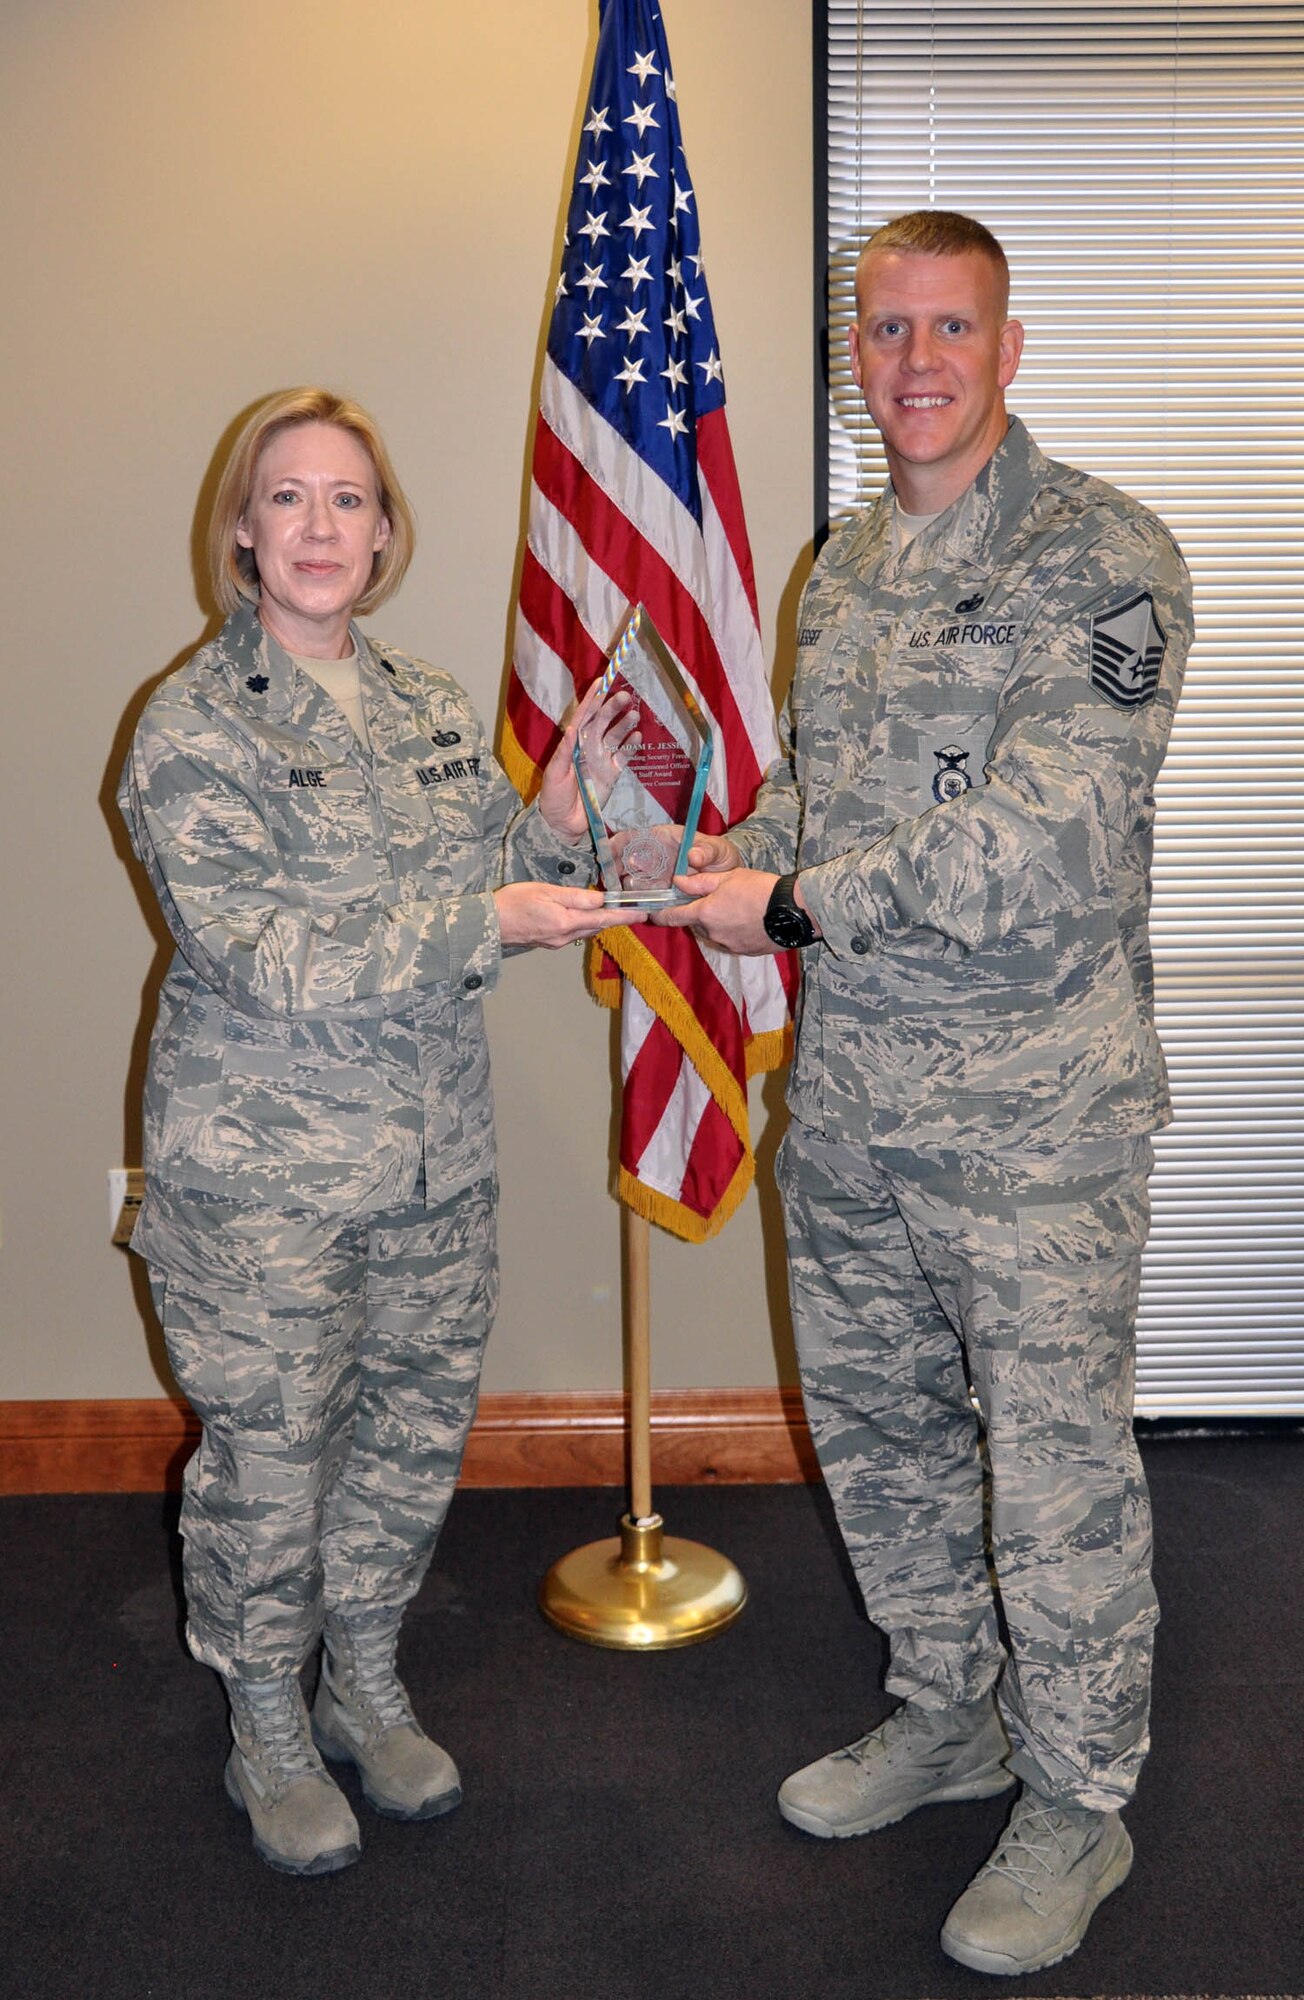 (Right) Master Sgt. Adam Jessee, 926th Security Forces Flight squad leader, receives Air Force Reserve Command's 2012 Outstanding Security Forces Senior Noncommissioned Officer Support Staff award from Lt. Col. Connie Alge, 926th Force Support Squadron commander, here Jan. 31. Jessee was recognized for managing a Regular Air Force standards and evaluation program that certified more than 500 personnel across four units, raising compliance 60 percent. Additionally, he developed a tracking database that processed 233 reports, cutting late reports by 30 percent. Jessee is also certified by the Las Vegas Metropolitan Police Department to instruct personnel on Standard Field Sobriety Tests, among many other accomplishments. (U.S. Air Force photo/Maj. Jessica Martin)